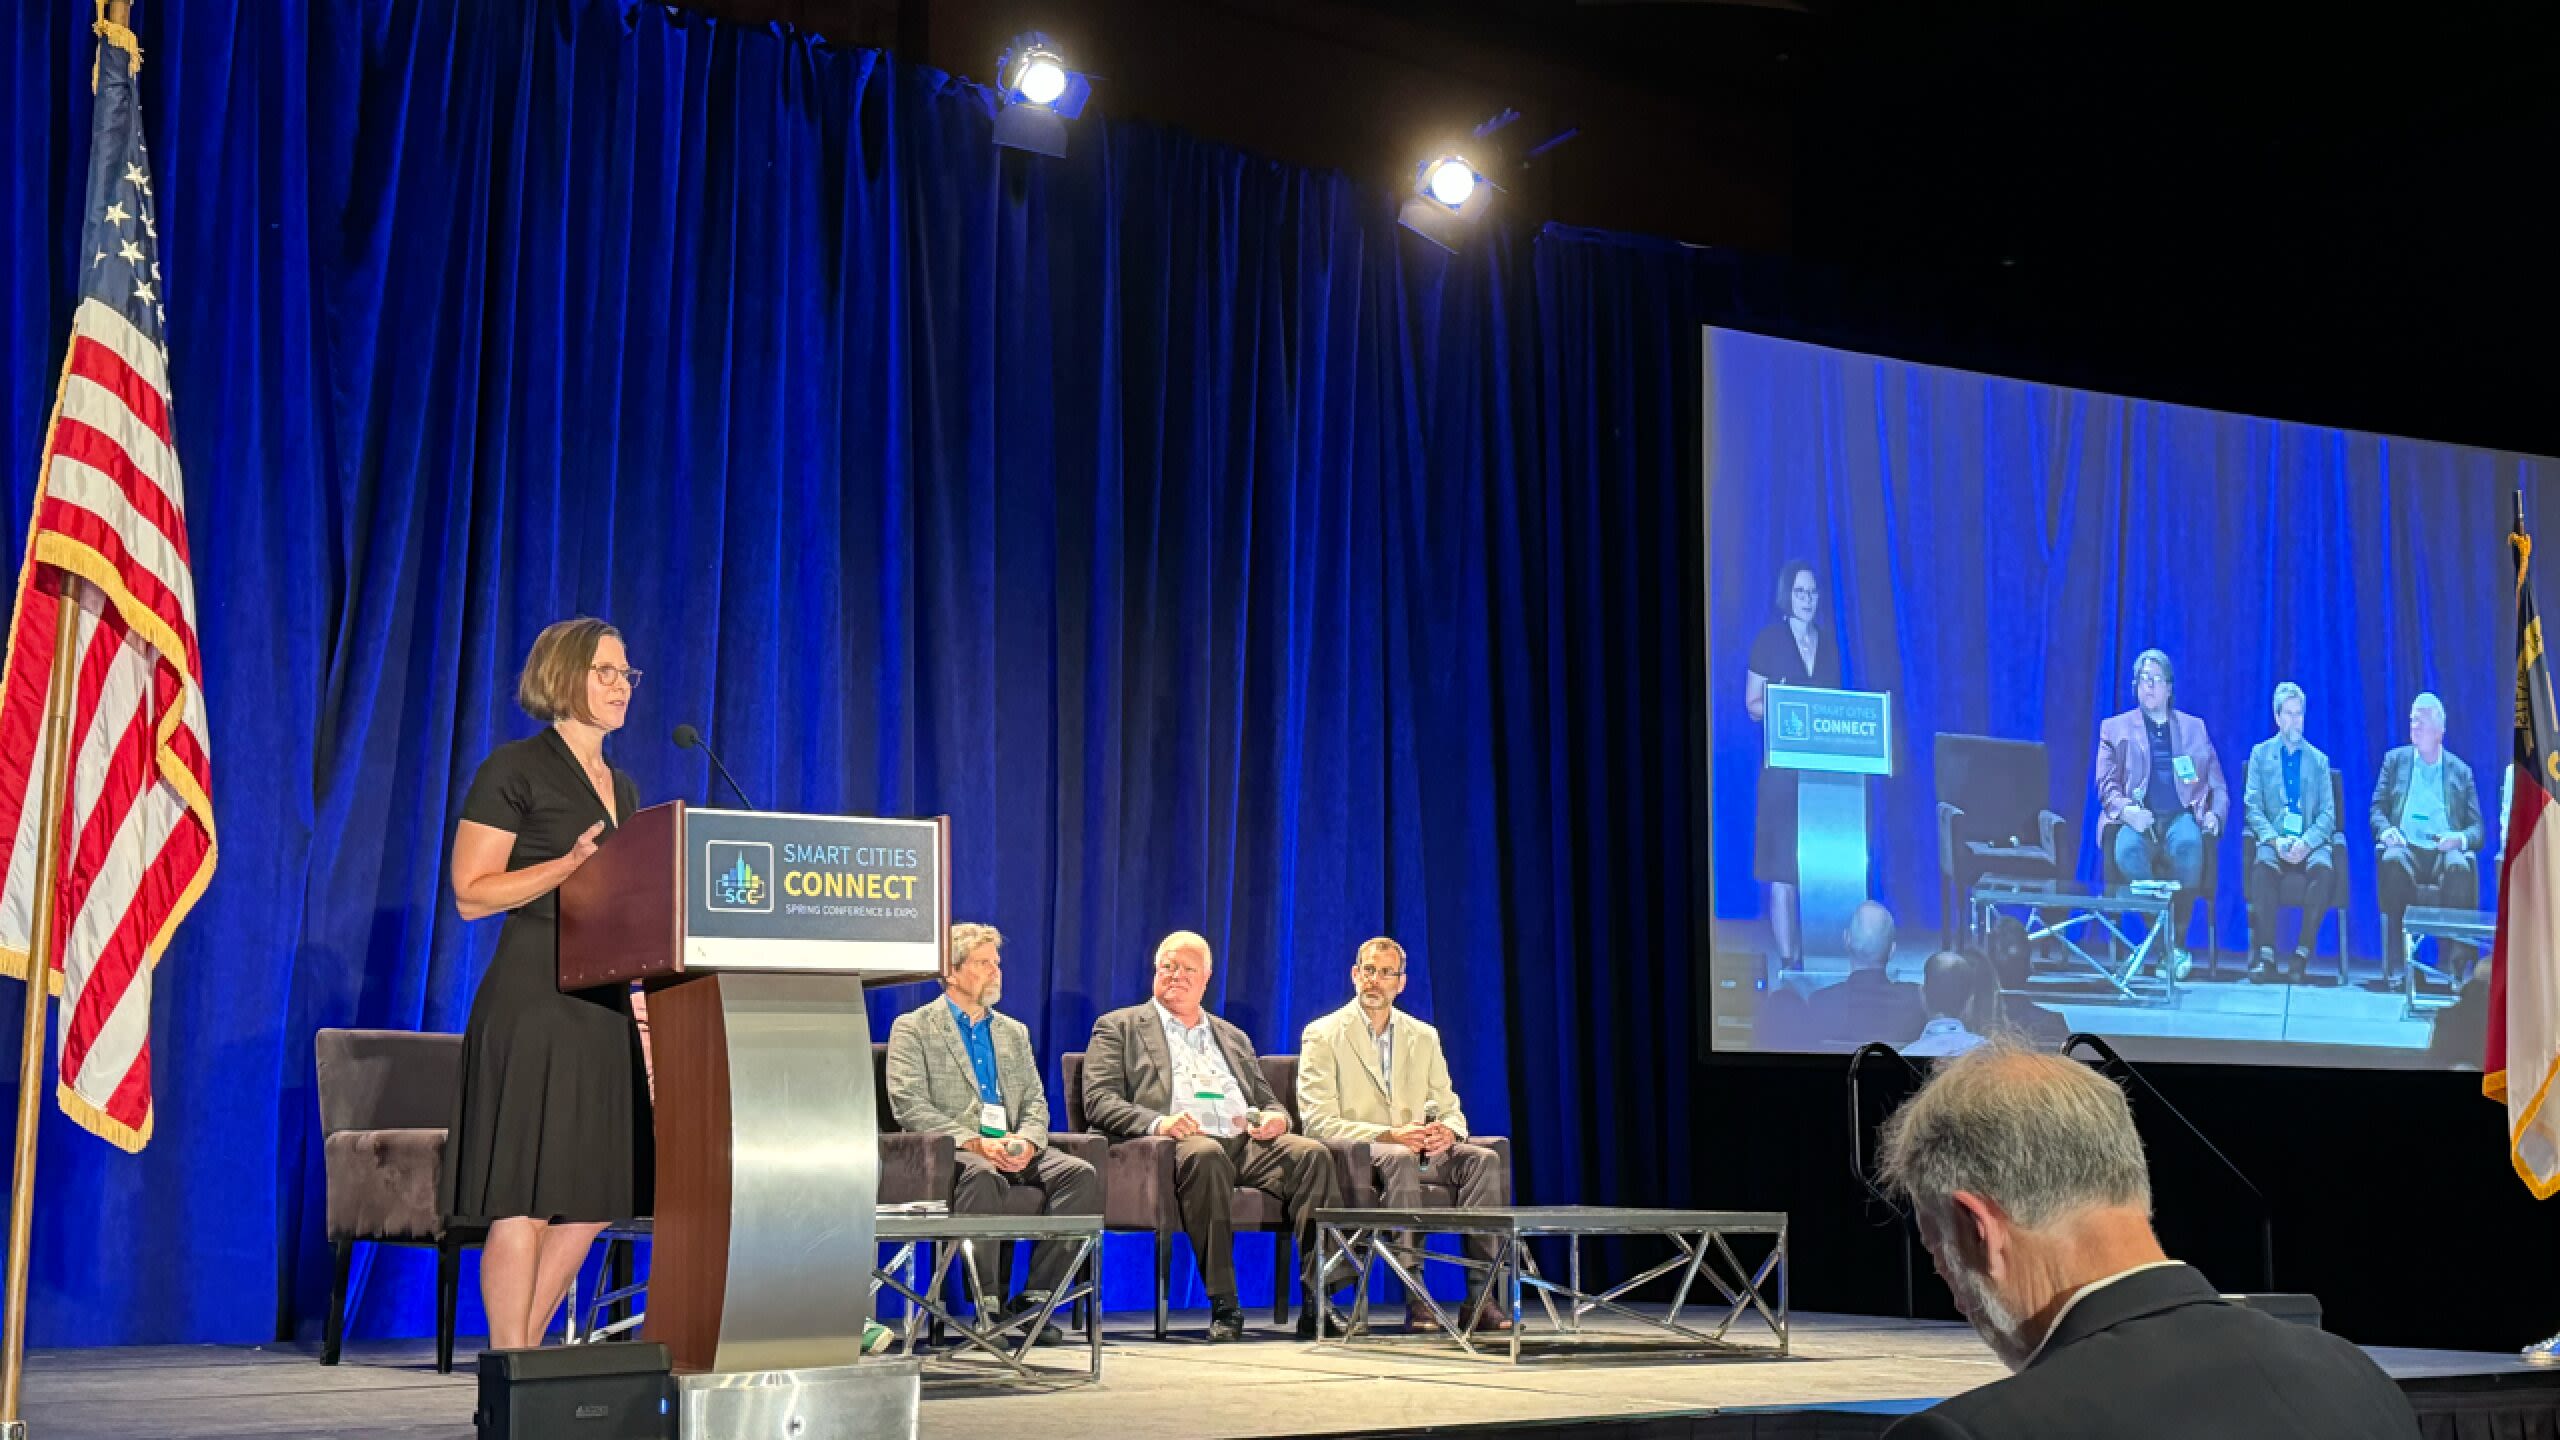 Raleigh connects technology and city leaders with Smart Cities Conference and Expo | WRAL TechWire